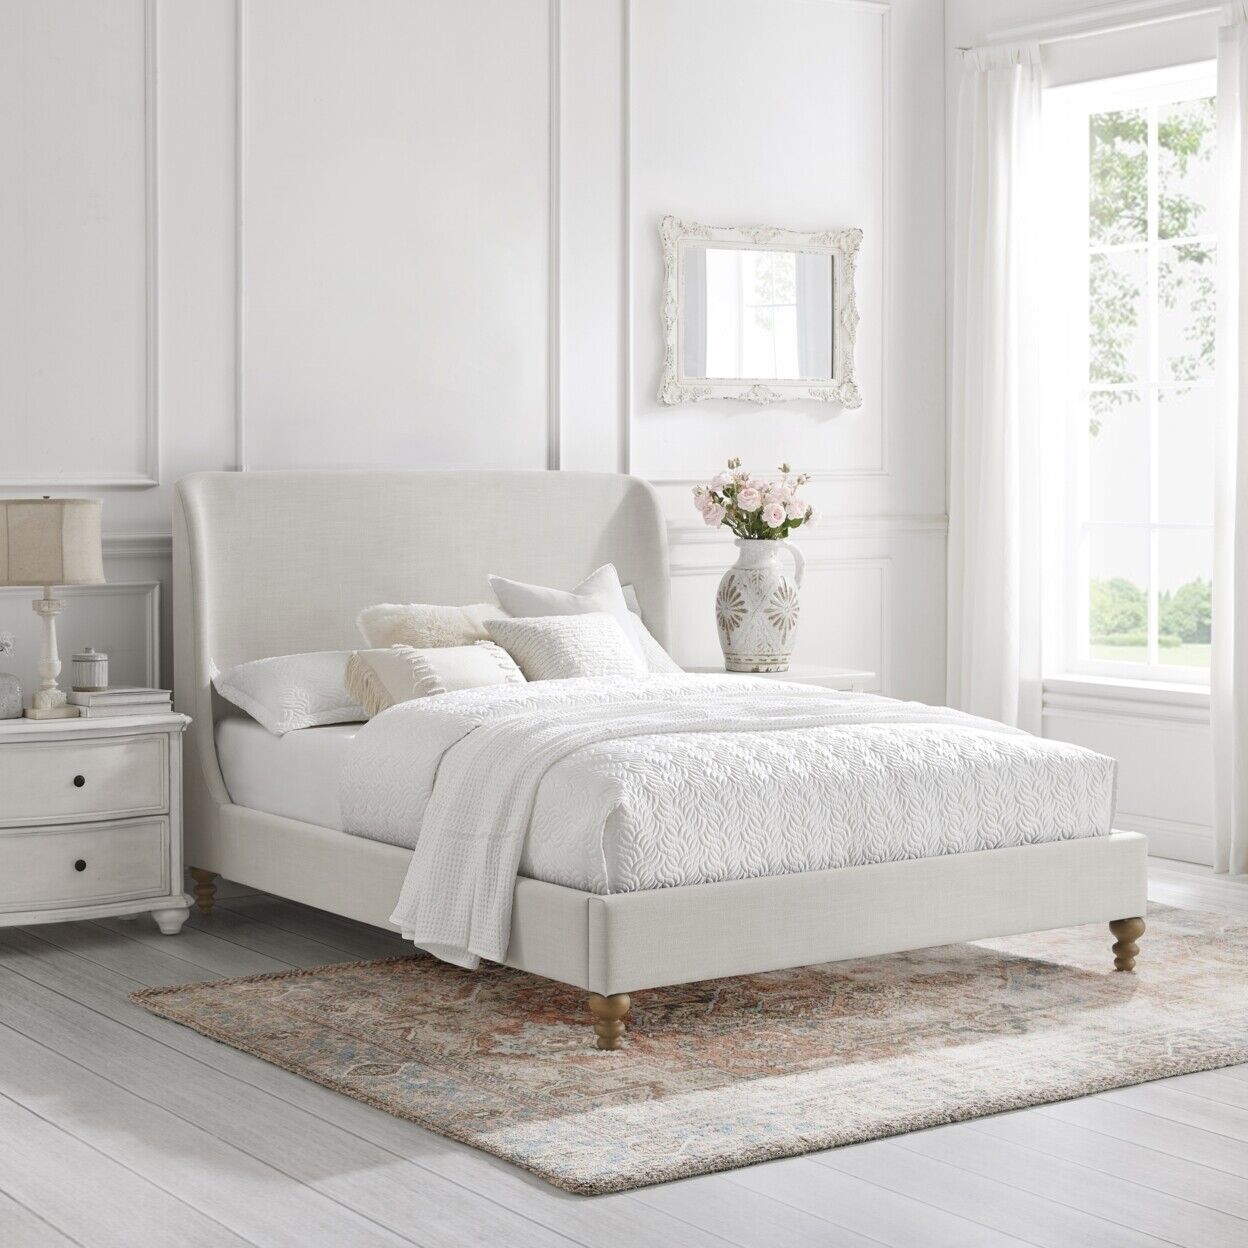 Elevate Your Bedroom with White Linen Upholstered Beds from LEIZI Furniture